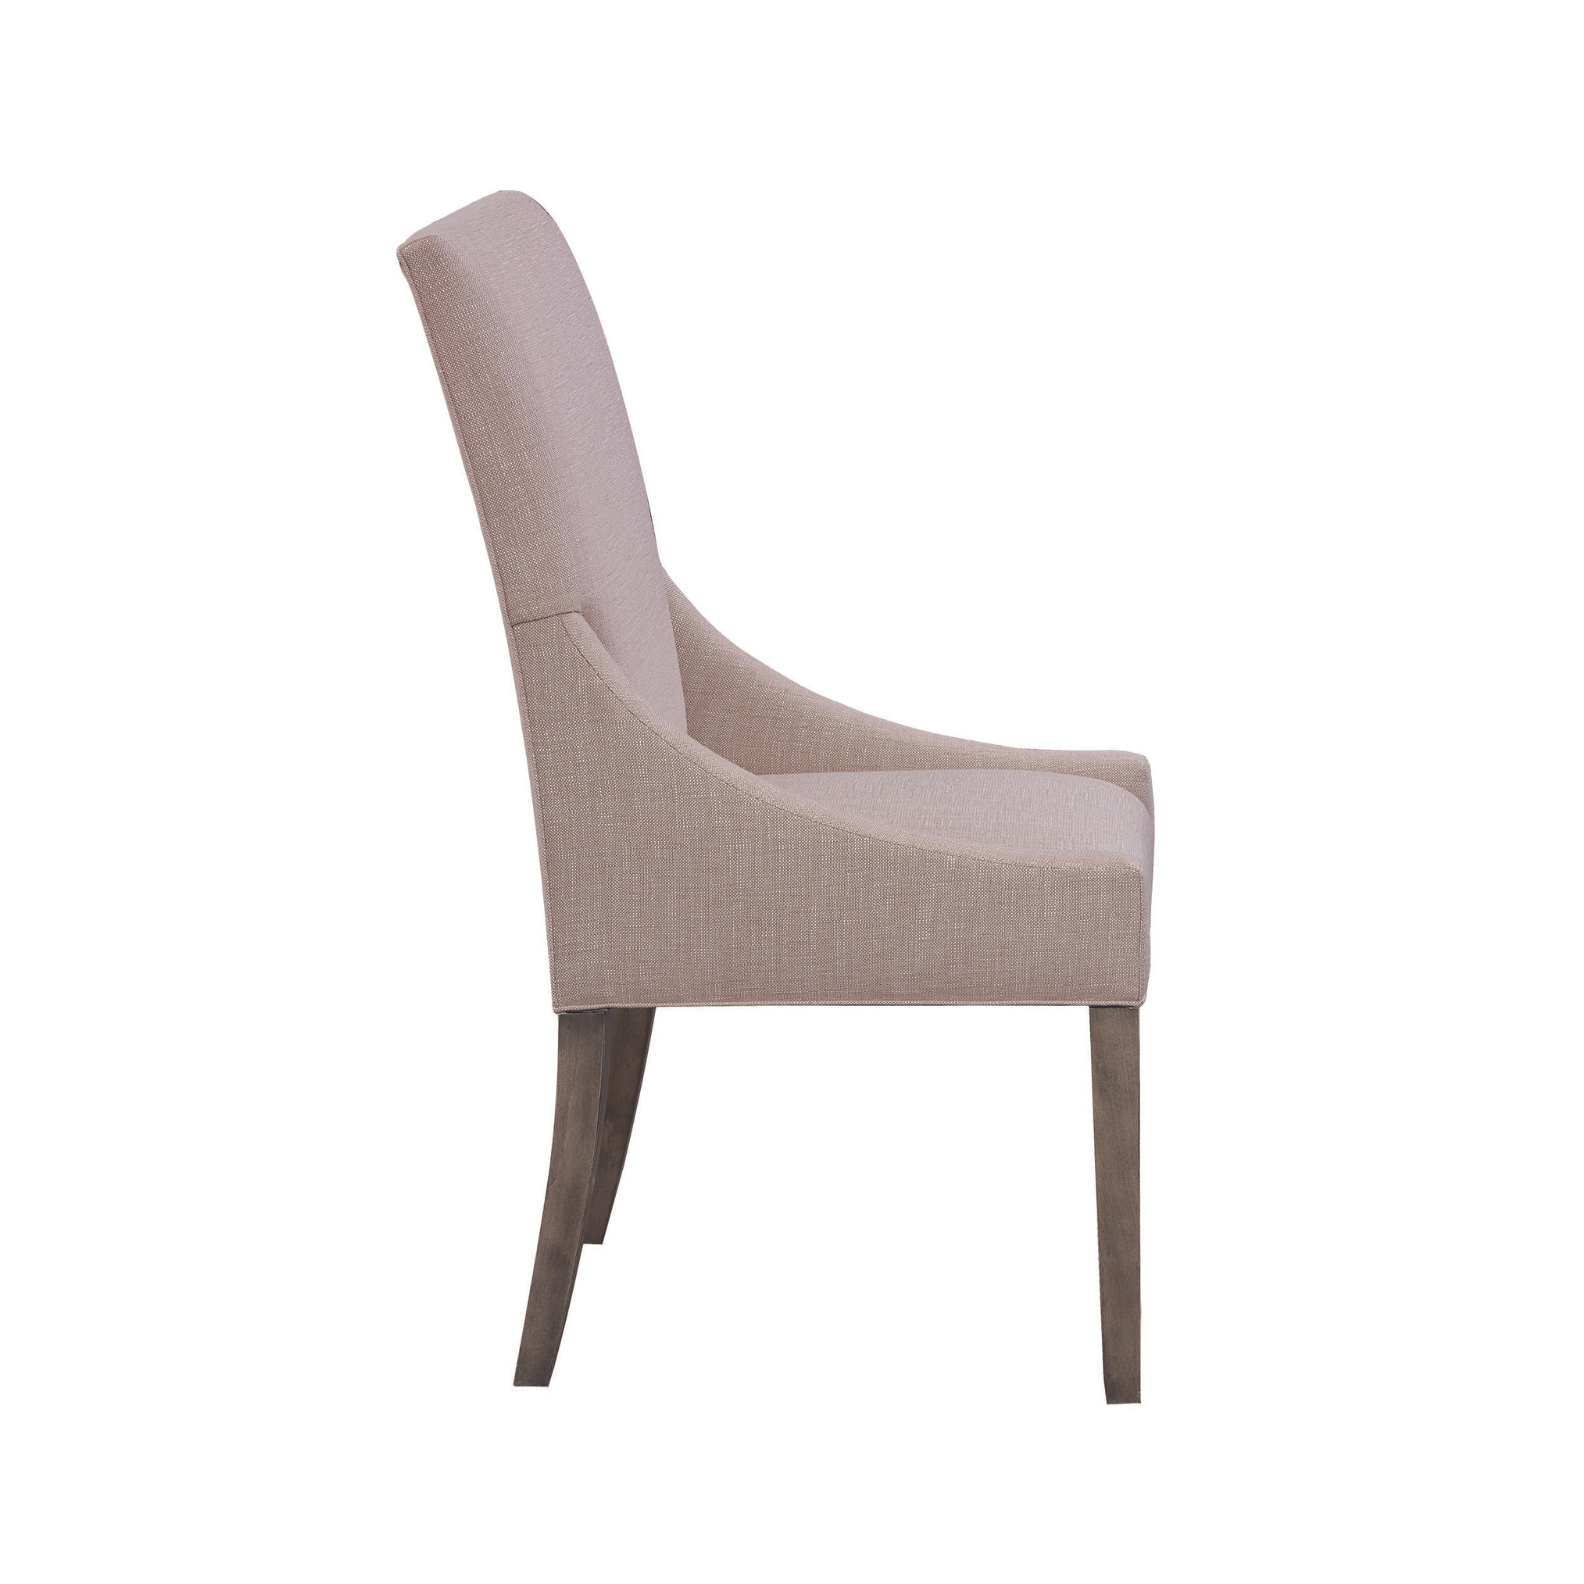 Alice Slope Arm Chair